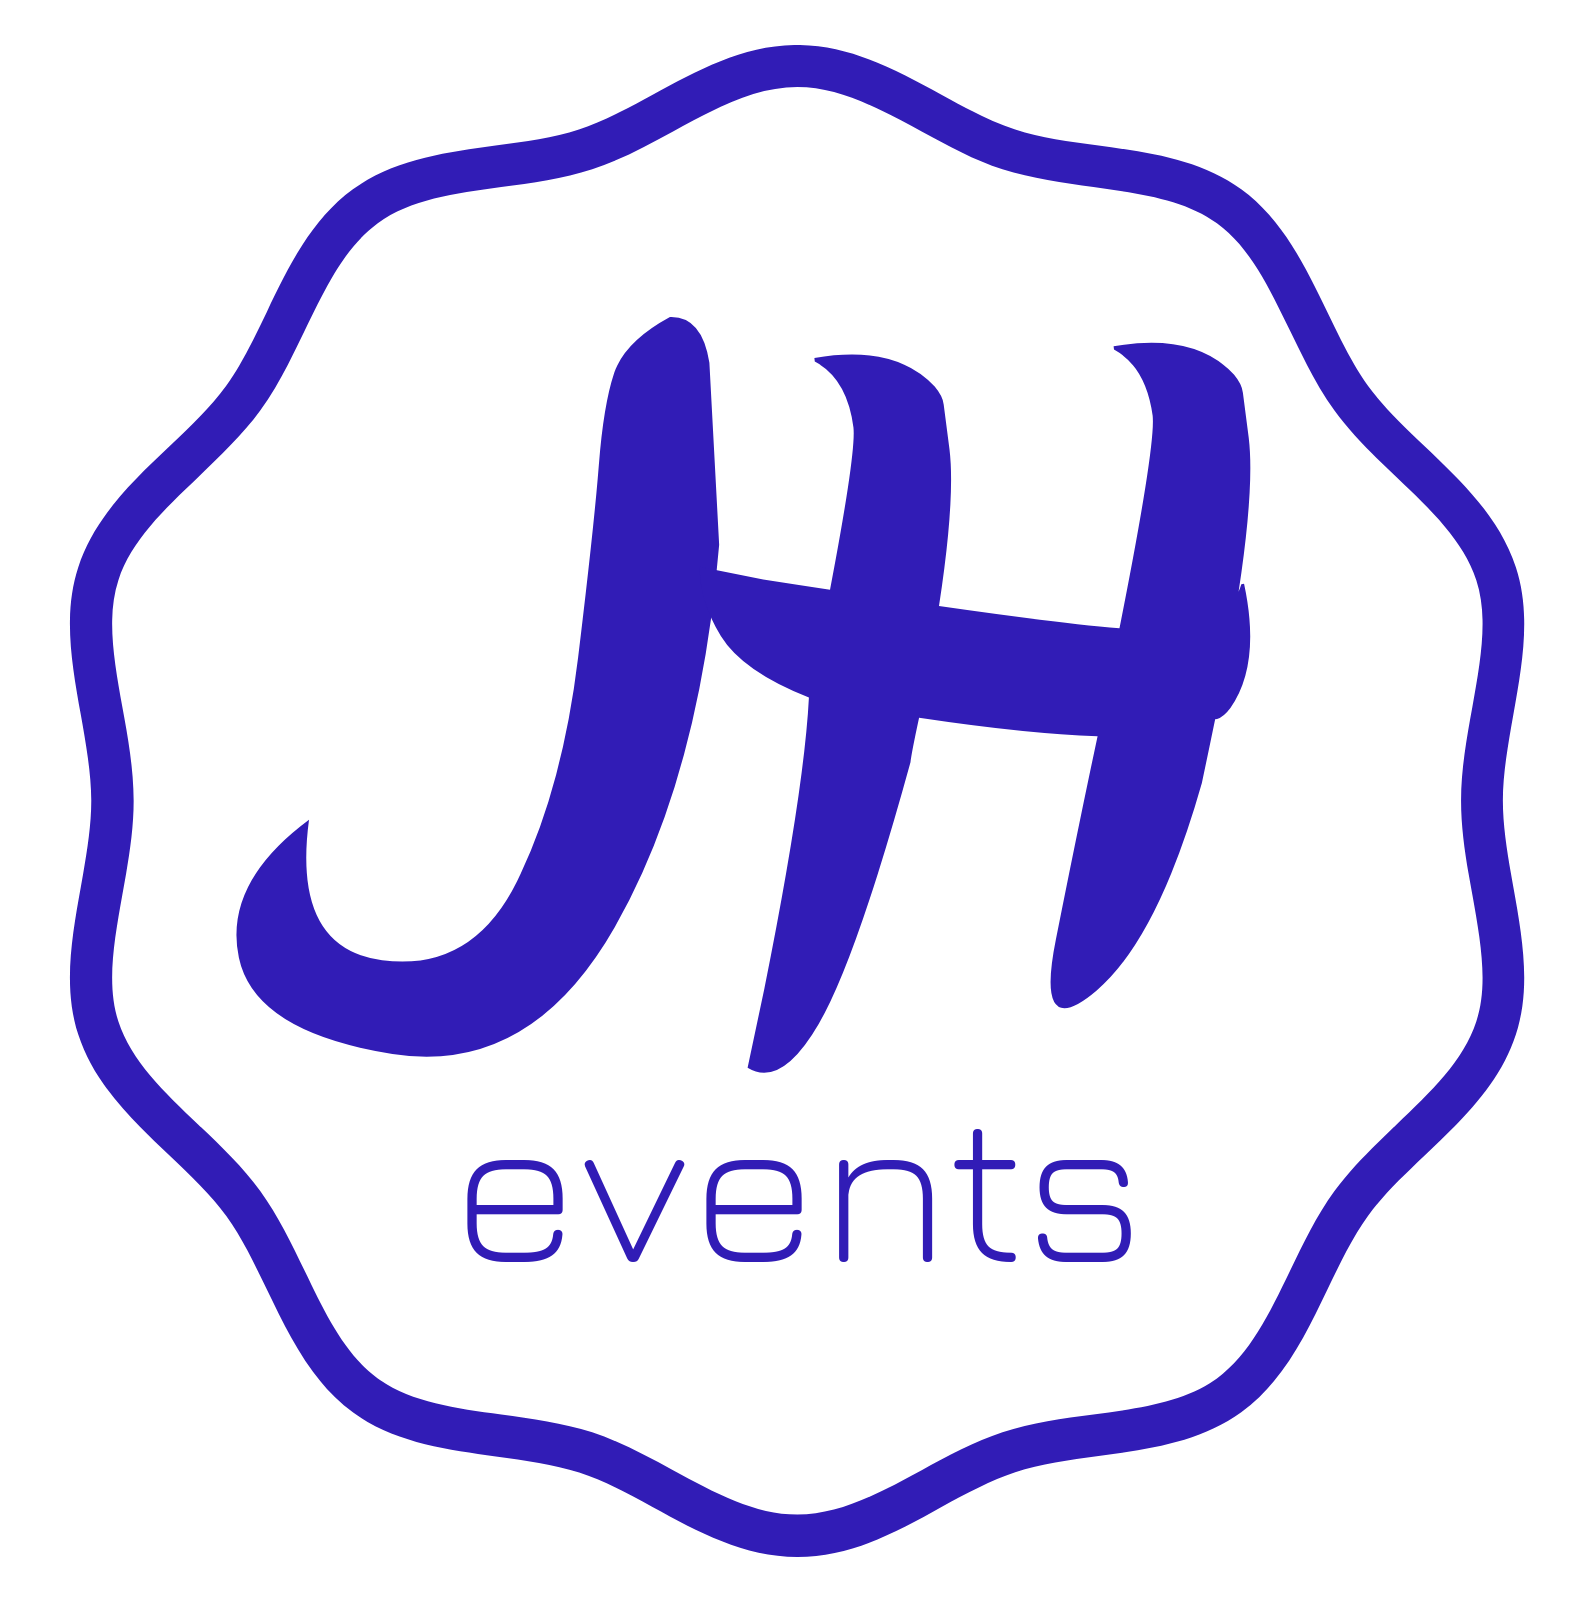 JH events